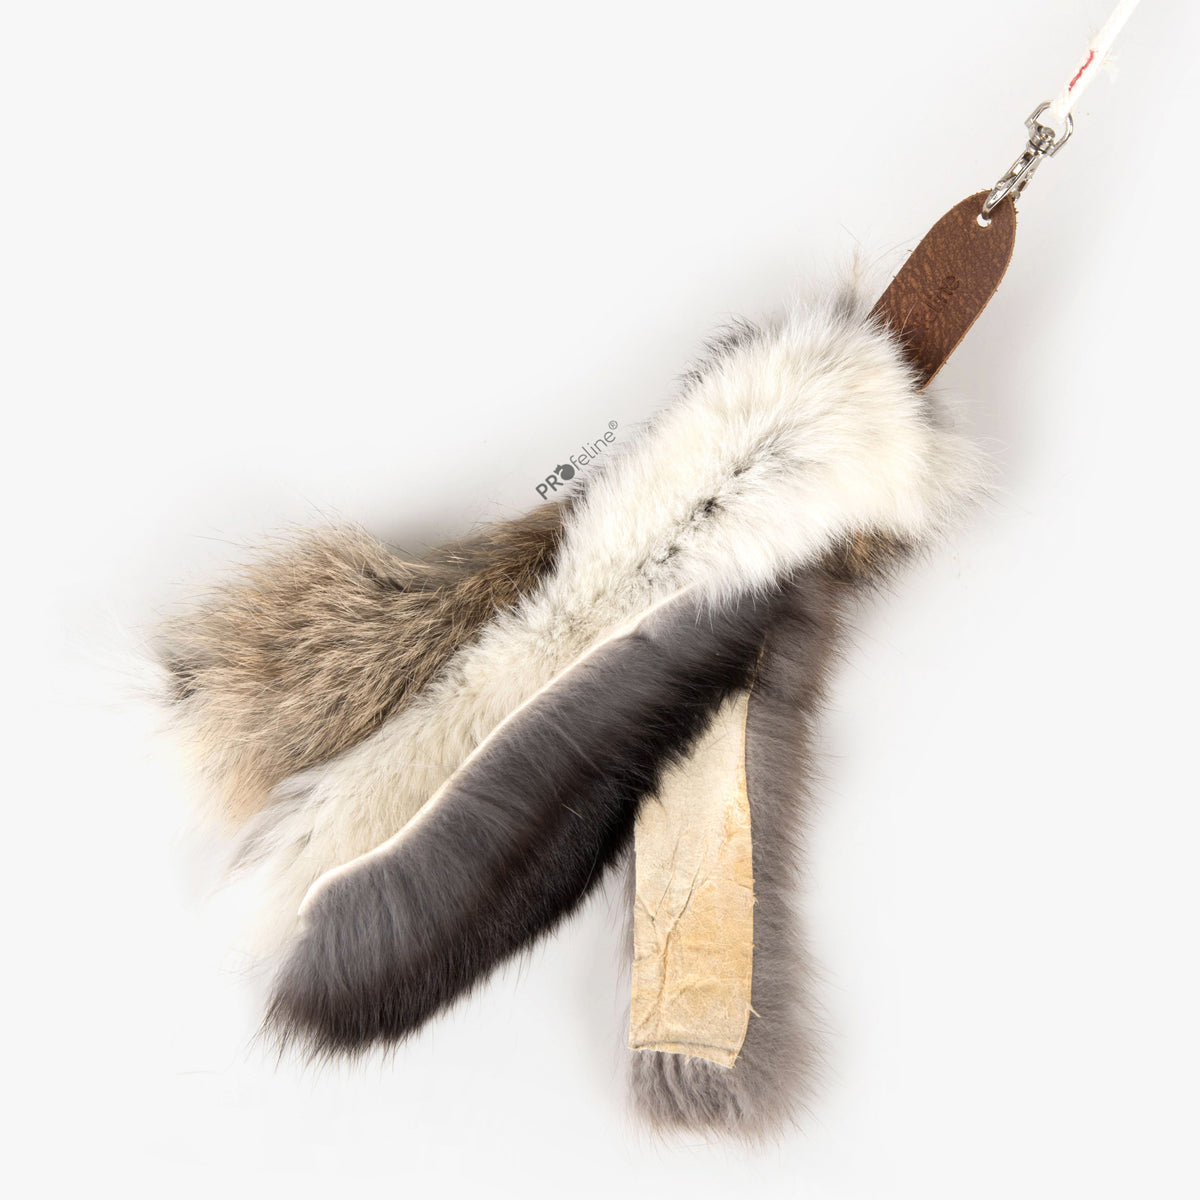 Profeline Fur Shaggy Cat Toy, Handmade With Fur & Leather | at Made Moggie